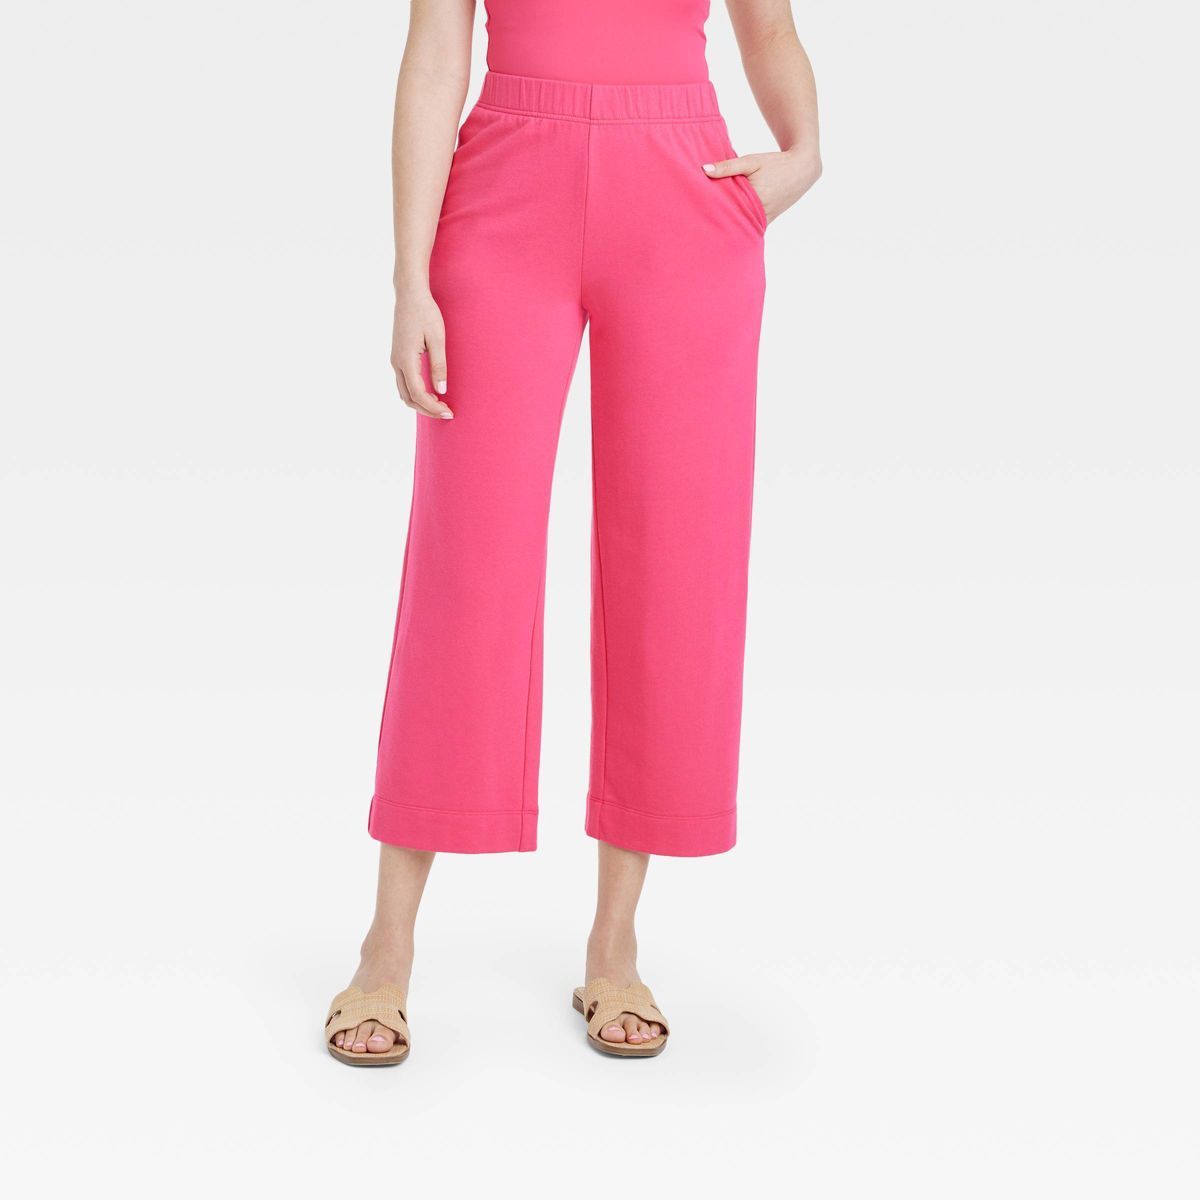 Women's High-Rise Cropped Sweatpants - A New Day™ Pink S | Target